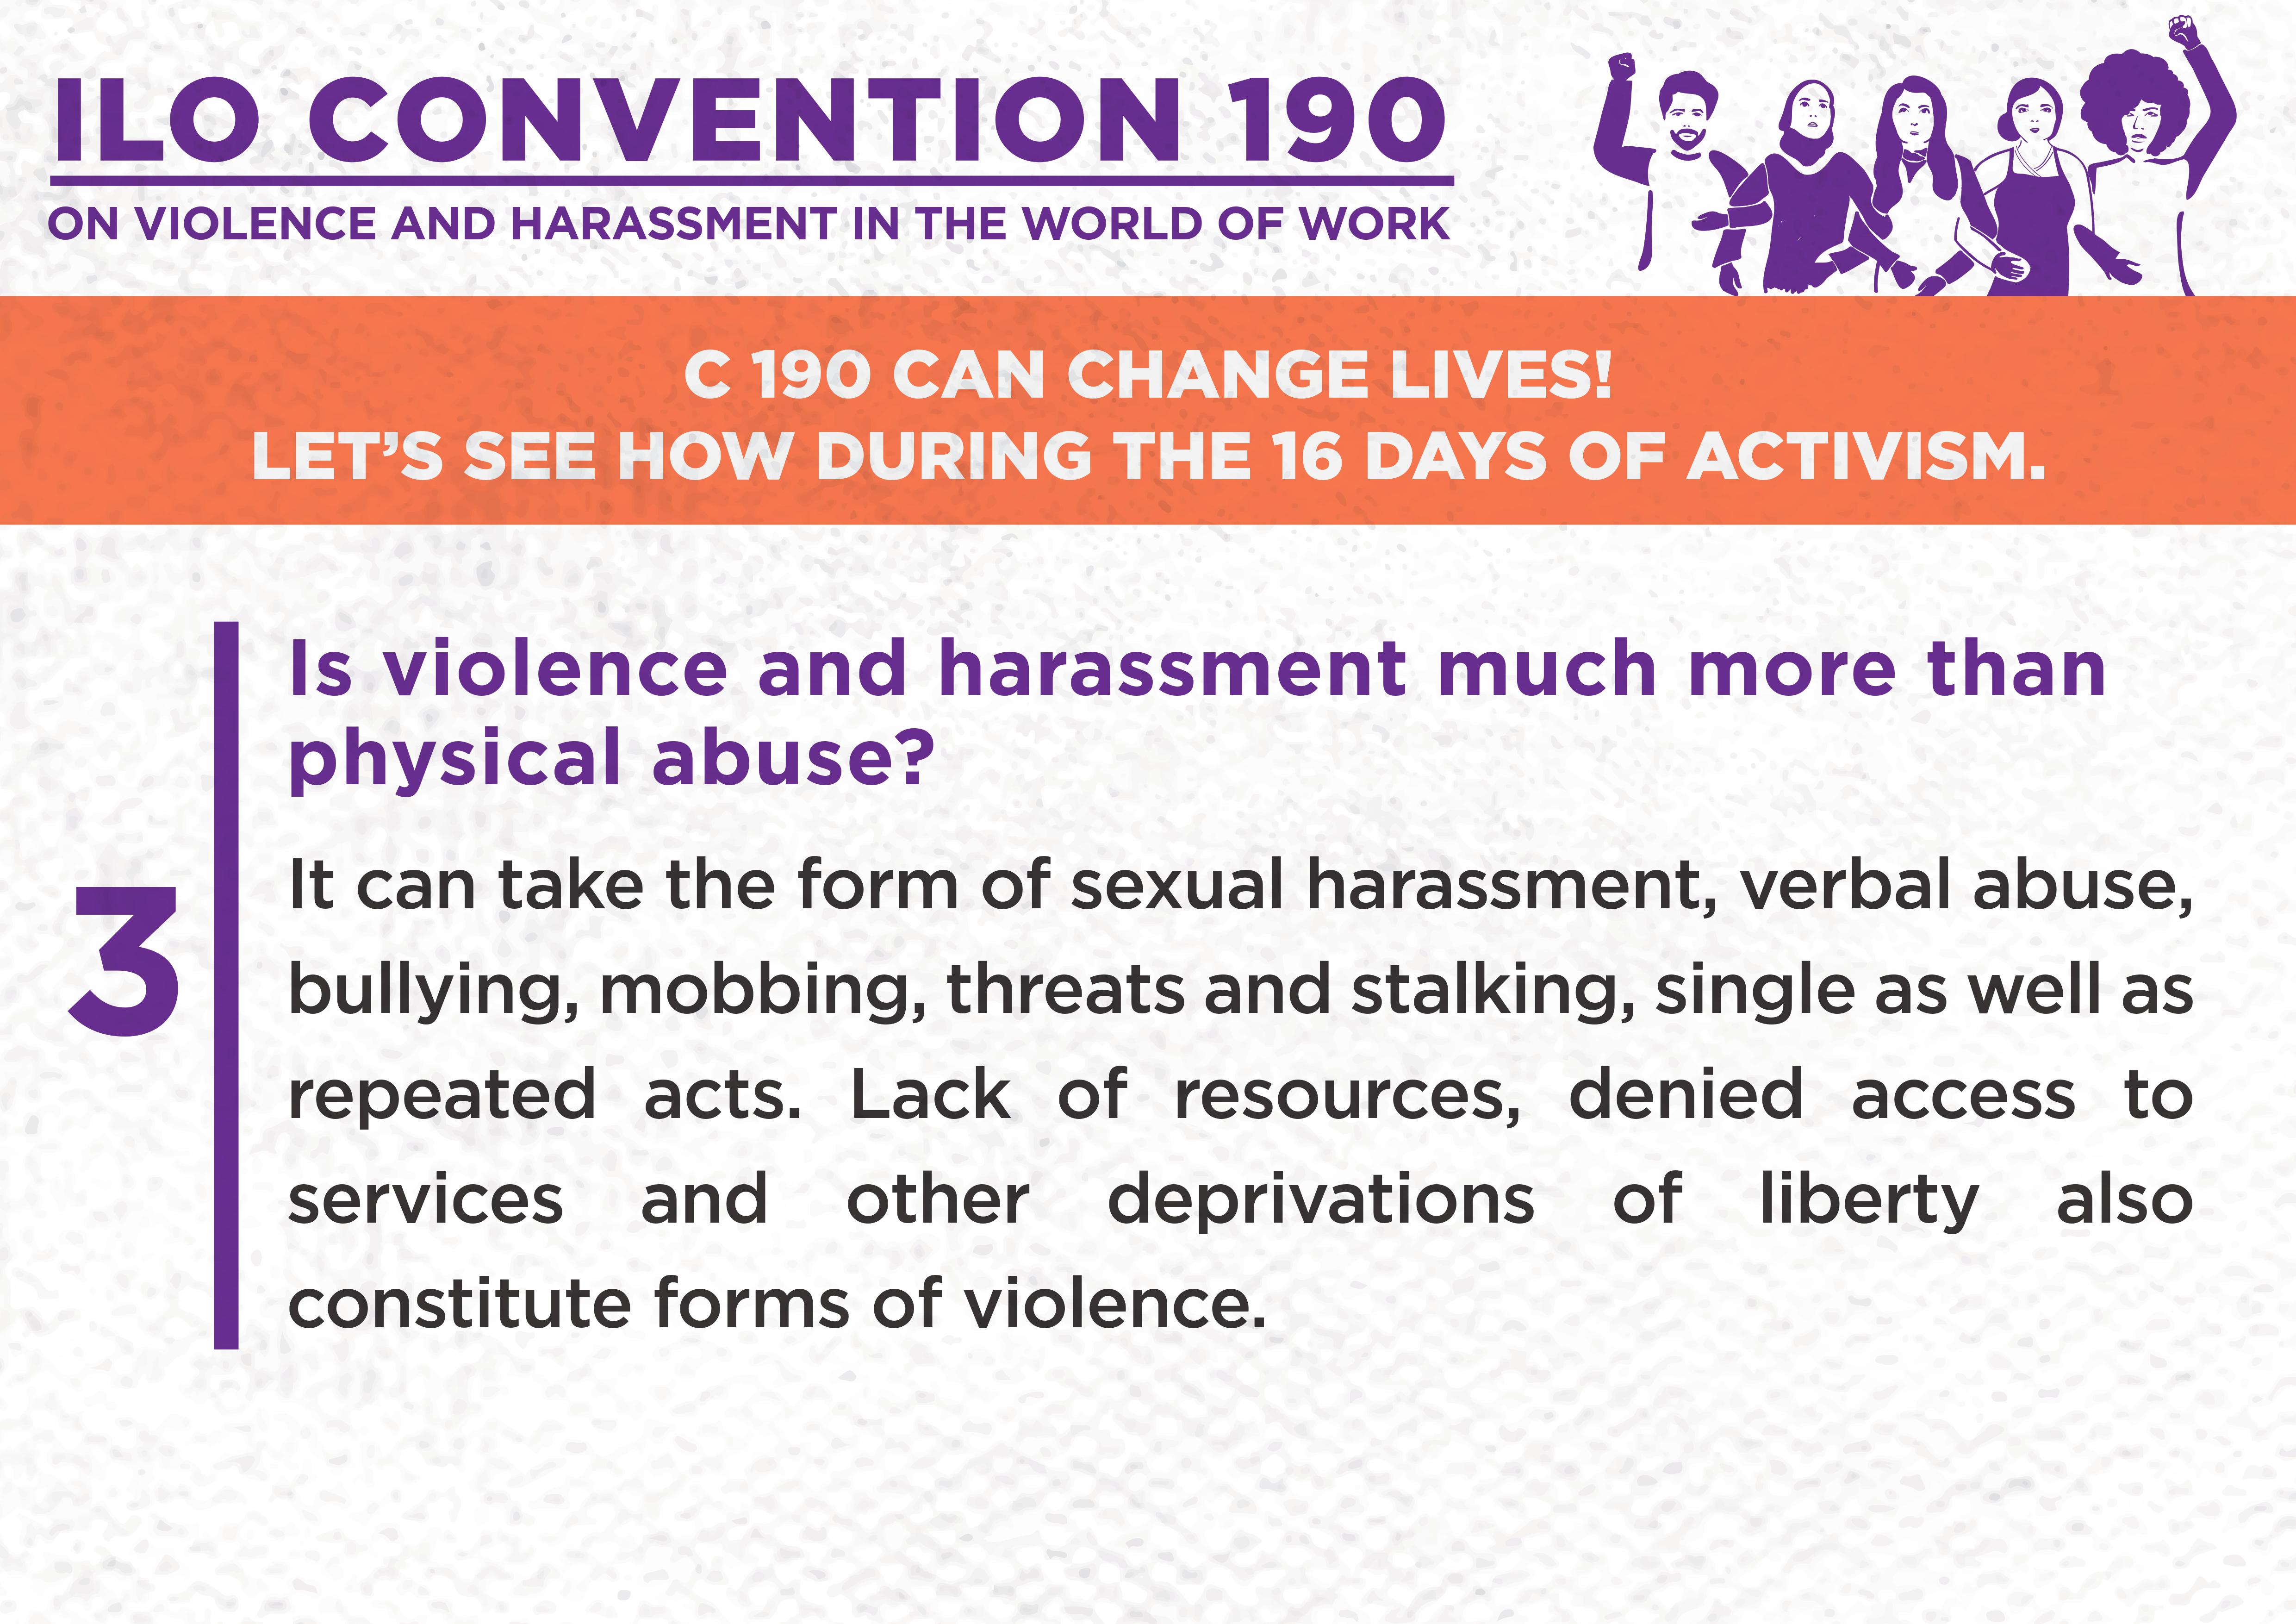 3. Is violence and harassment is much more than physical abuse?